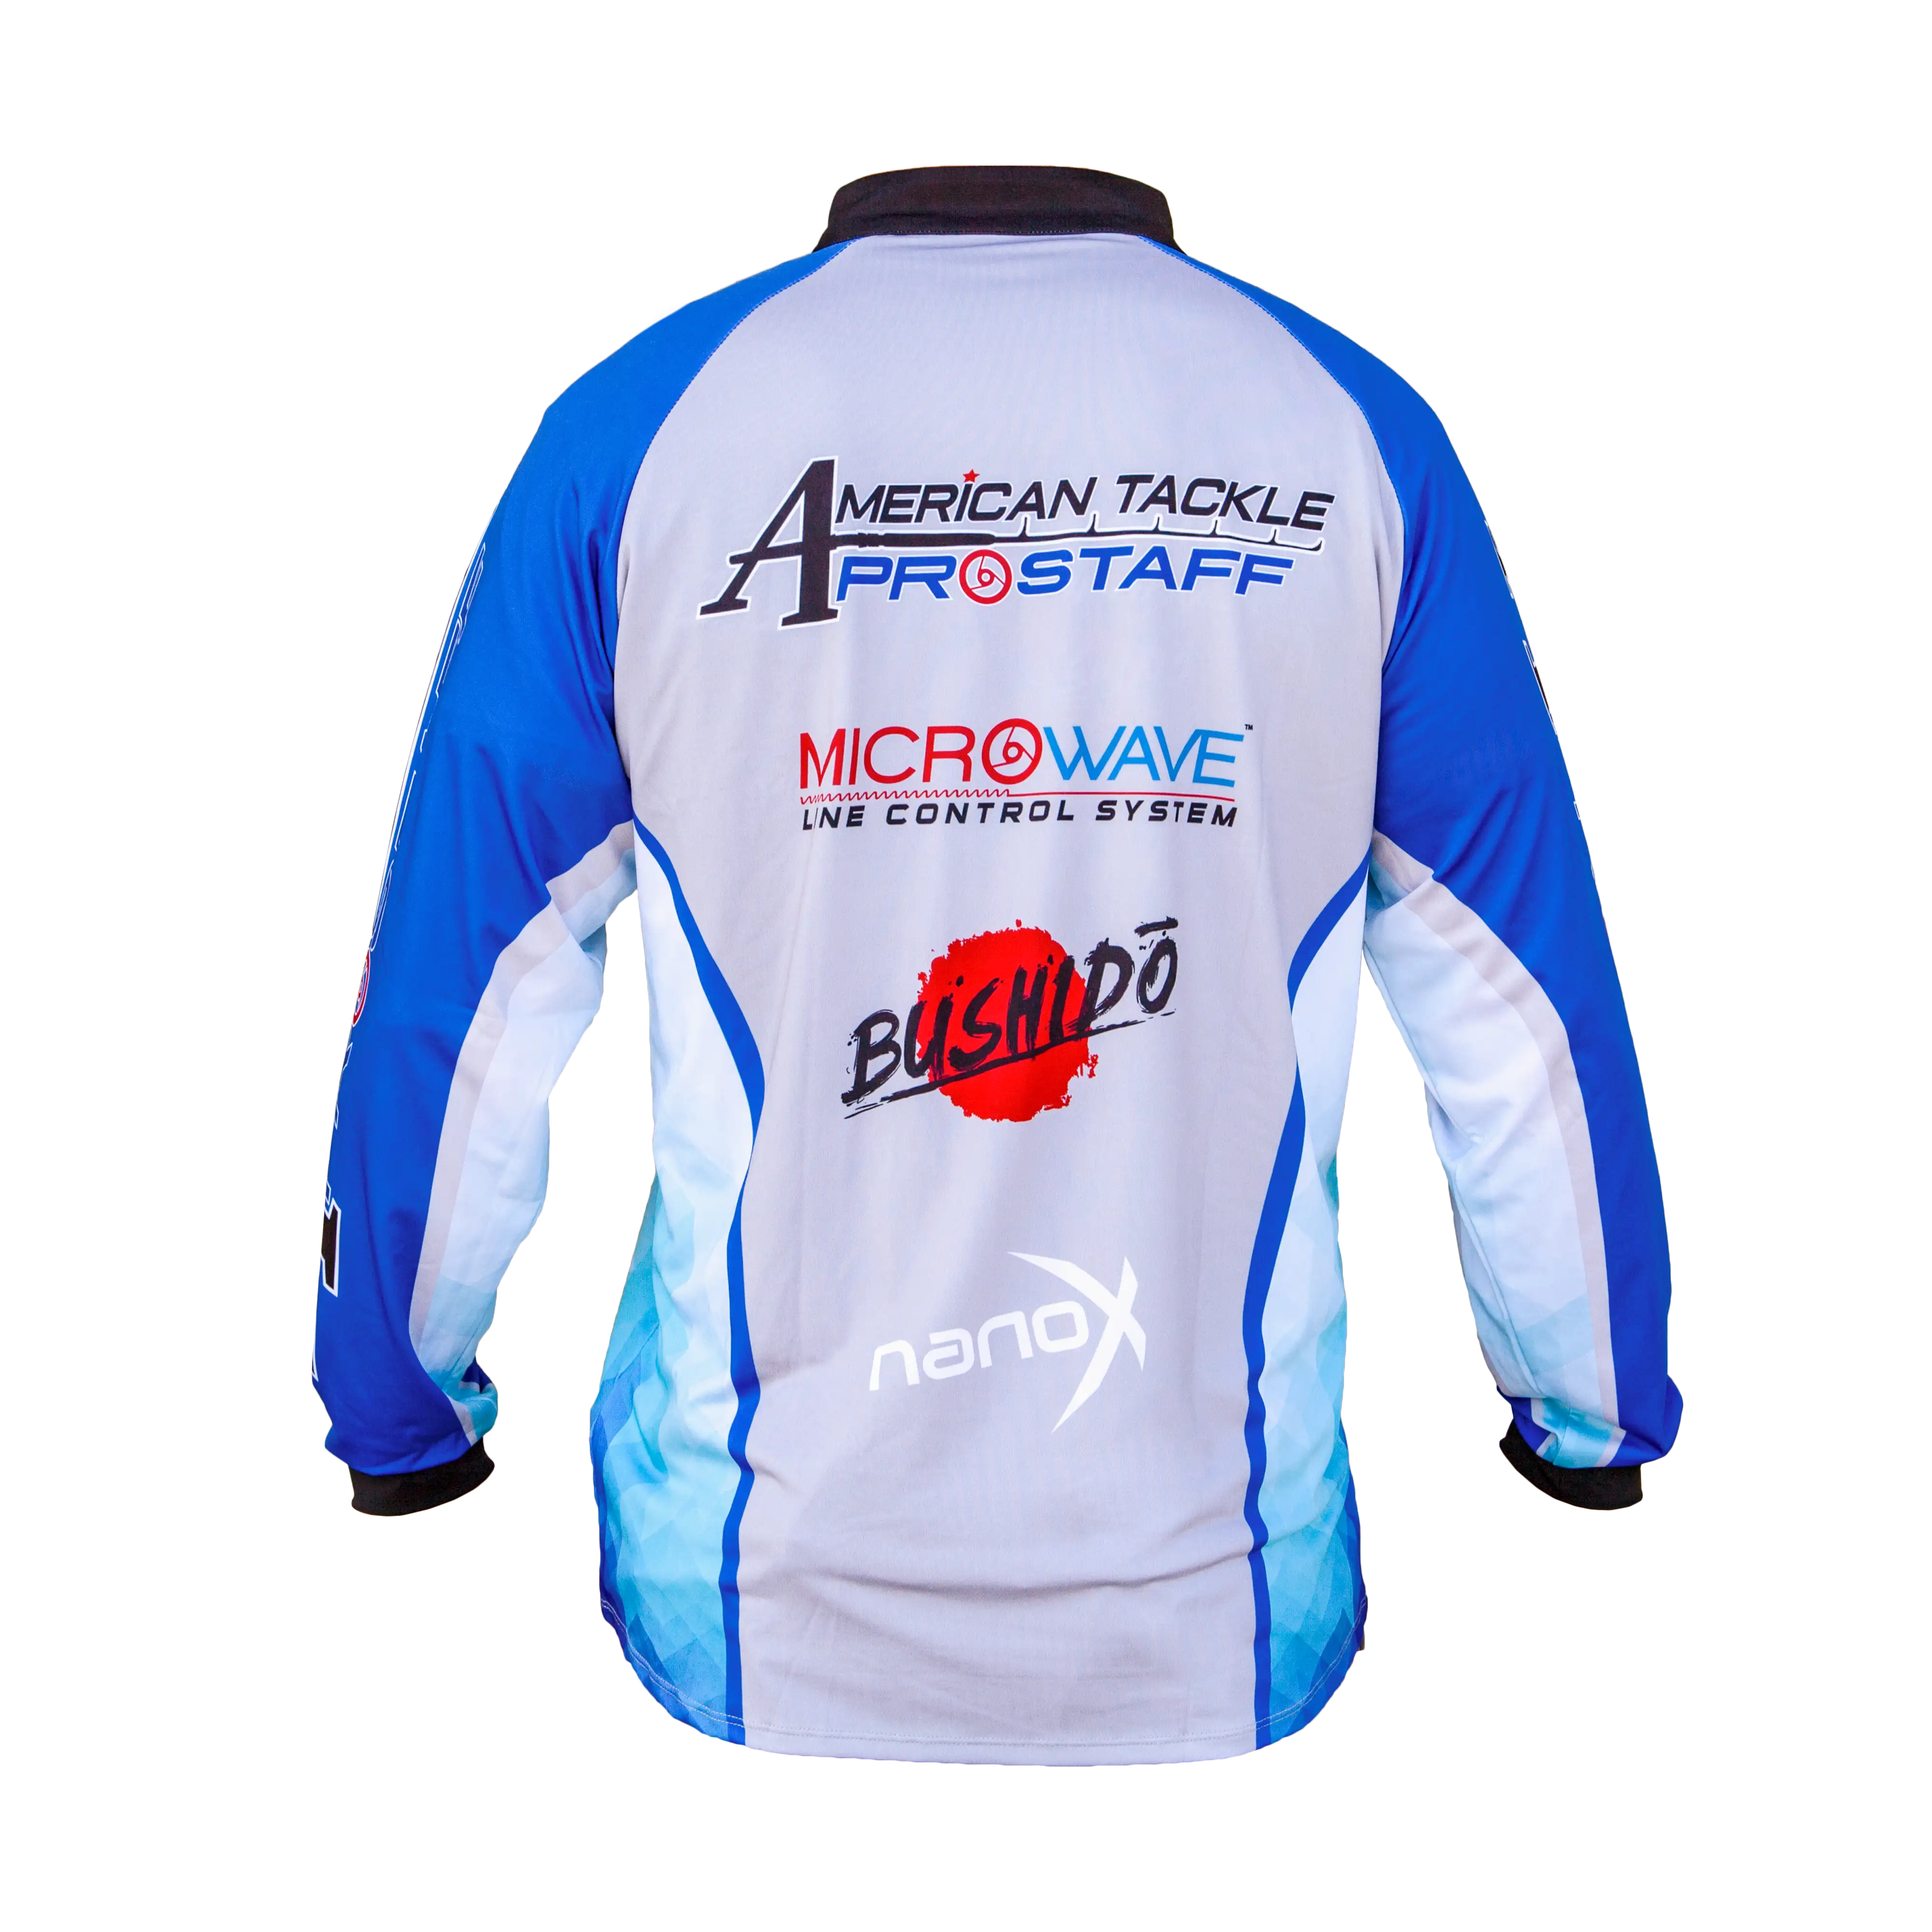 American Tackle Prostaff Jersey - Blue & Gray Small